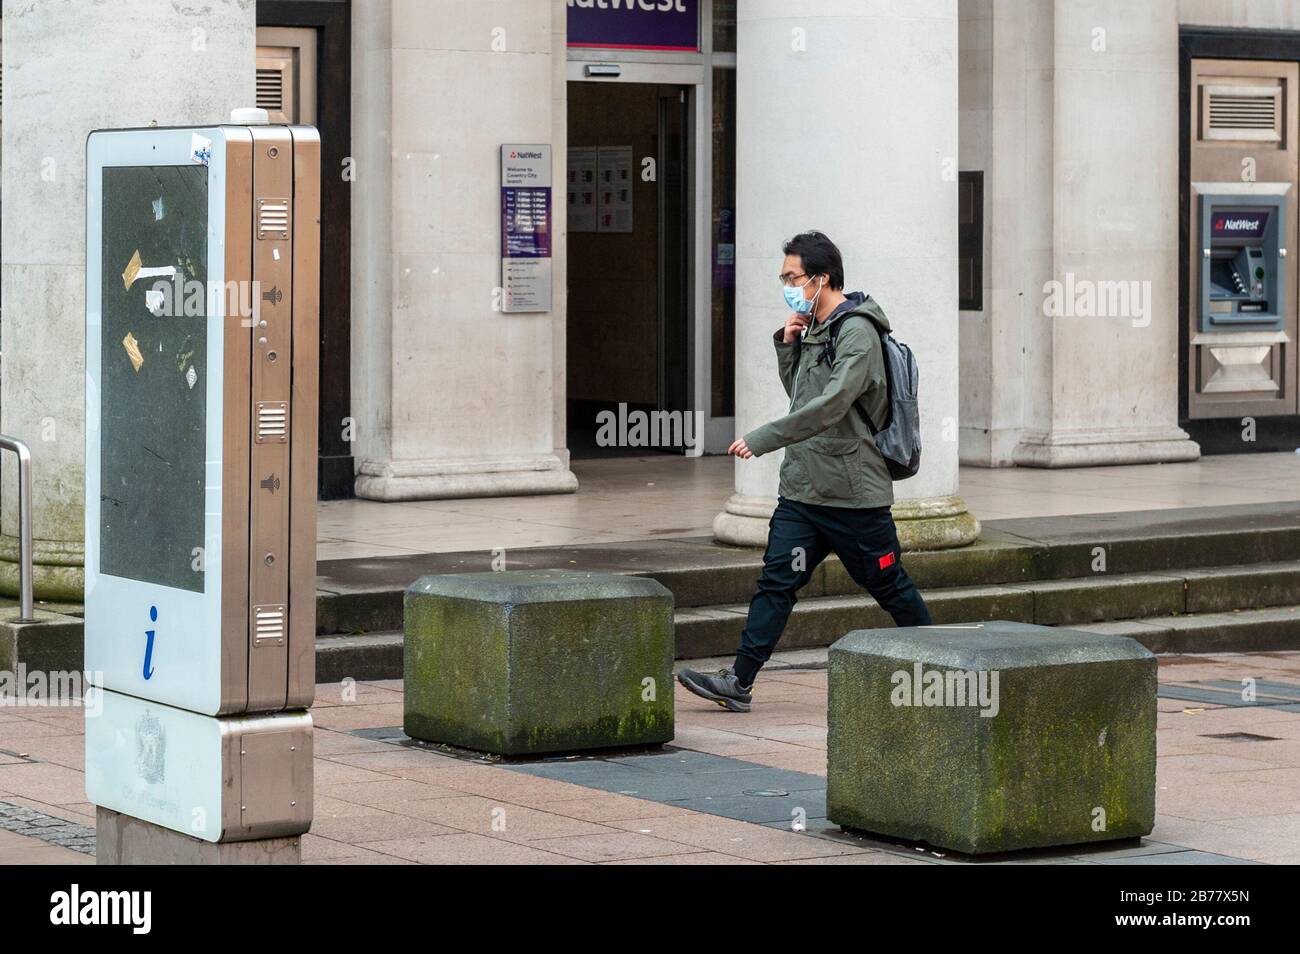 Coventry, West Midlands, UK. 14th Mar, 2020. The Coronavirus pandemic, or Covid-19, forced shoppers to wear protective masks in an almost deserted Coventry city centre this morning. Credit: Andy Gibson/Alamy Live News Stock Photo